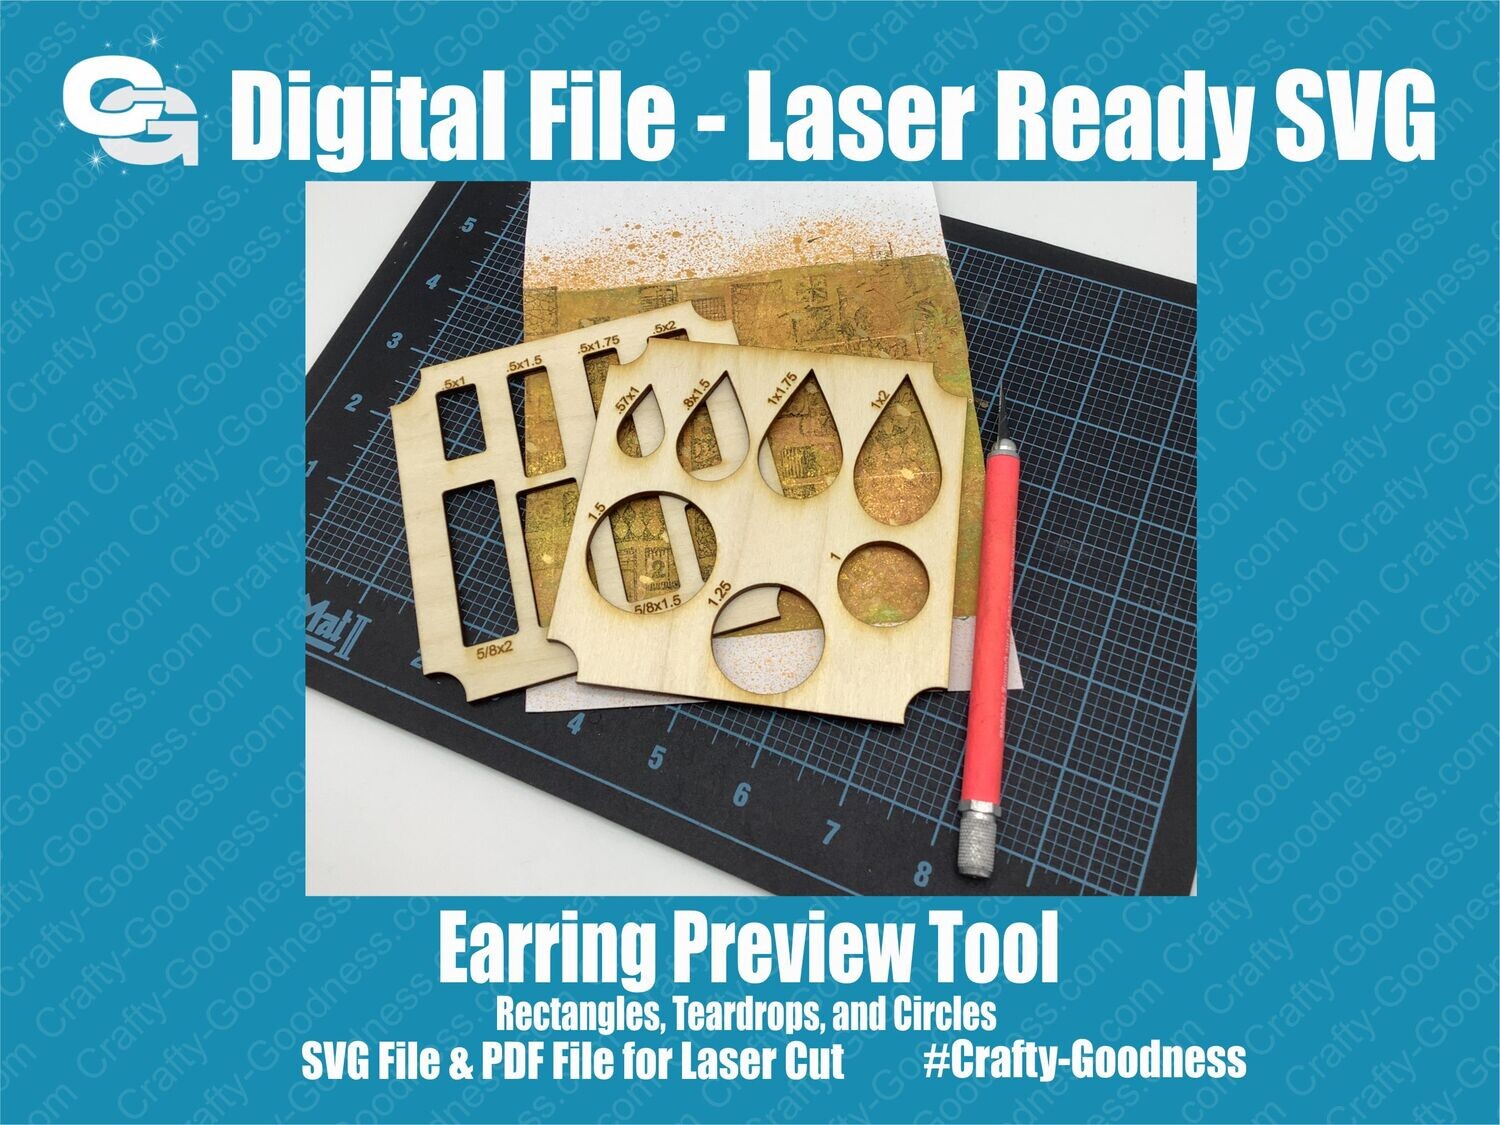 Earring Preview Template Jewelry Design Tool - SVG Glowforge Cut File Digital Download PDF